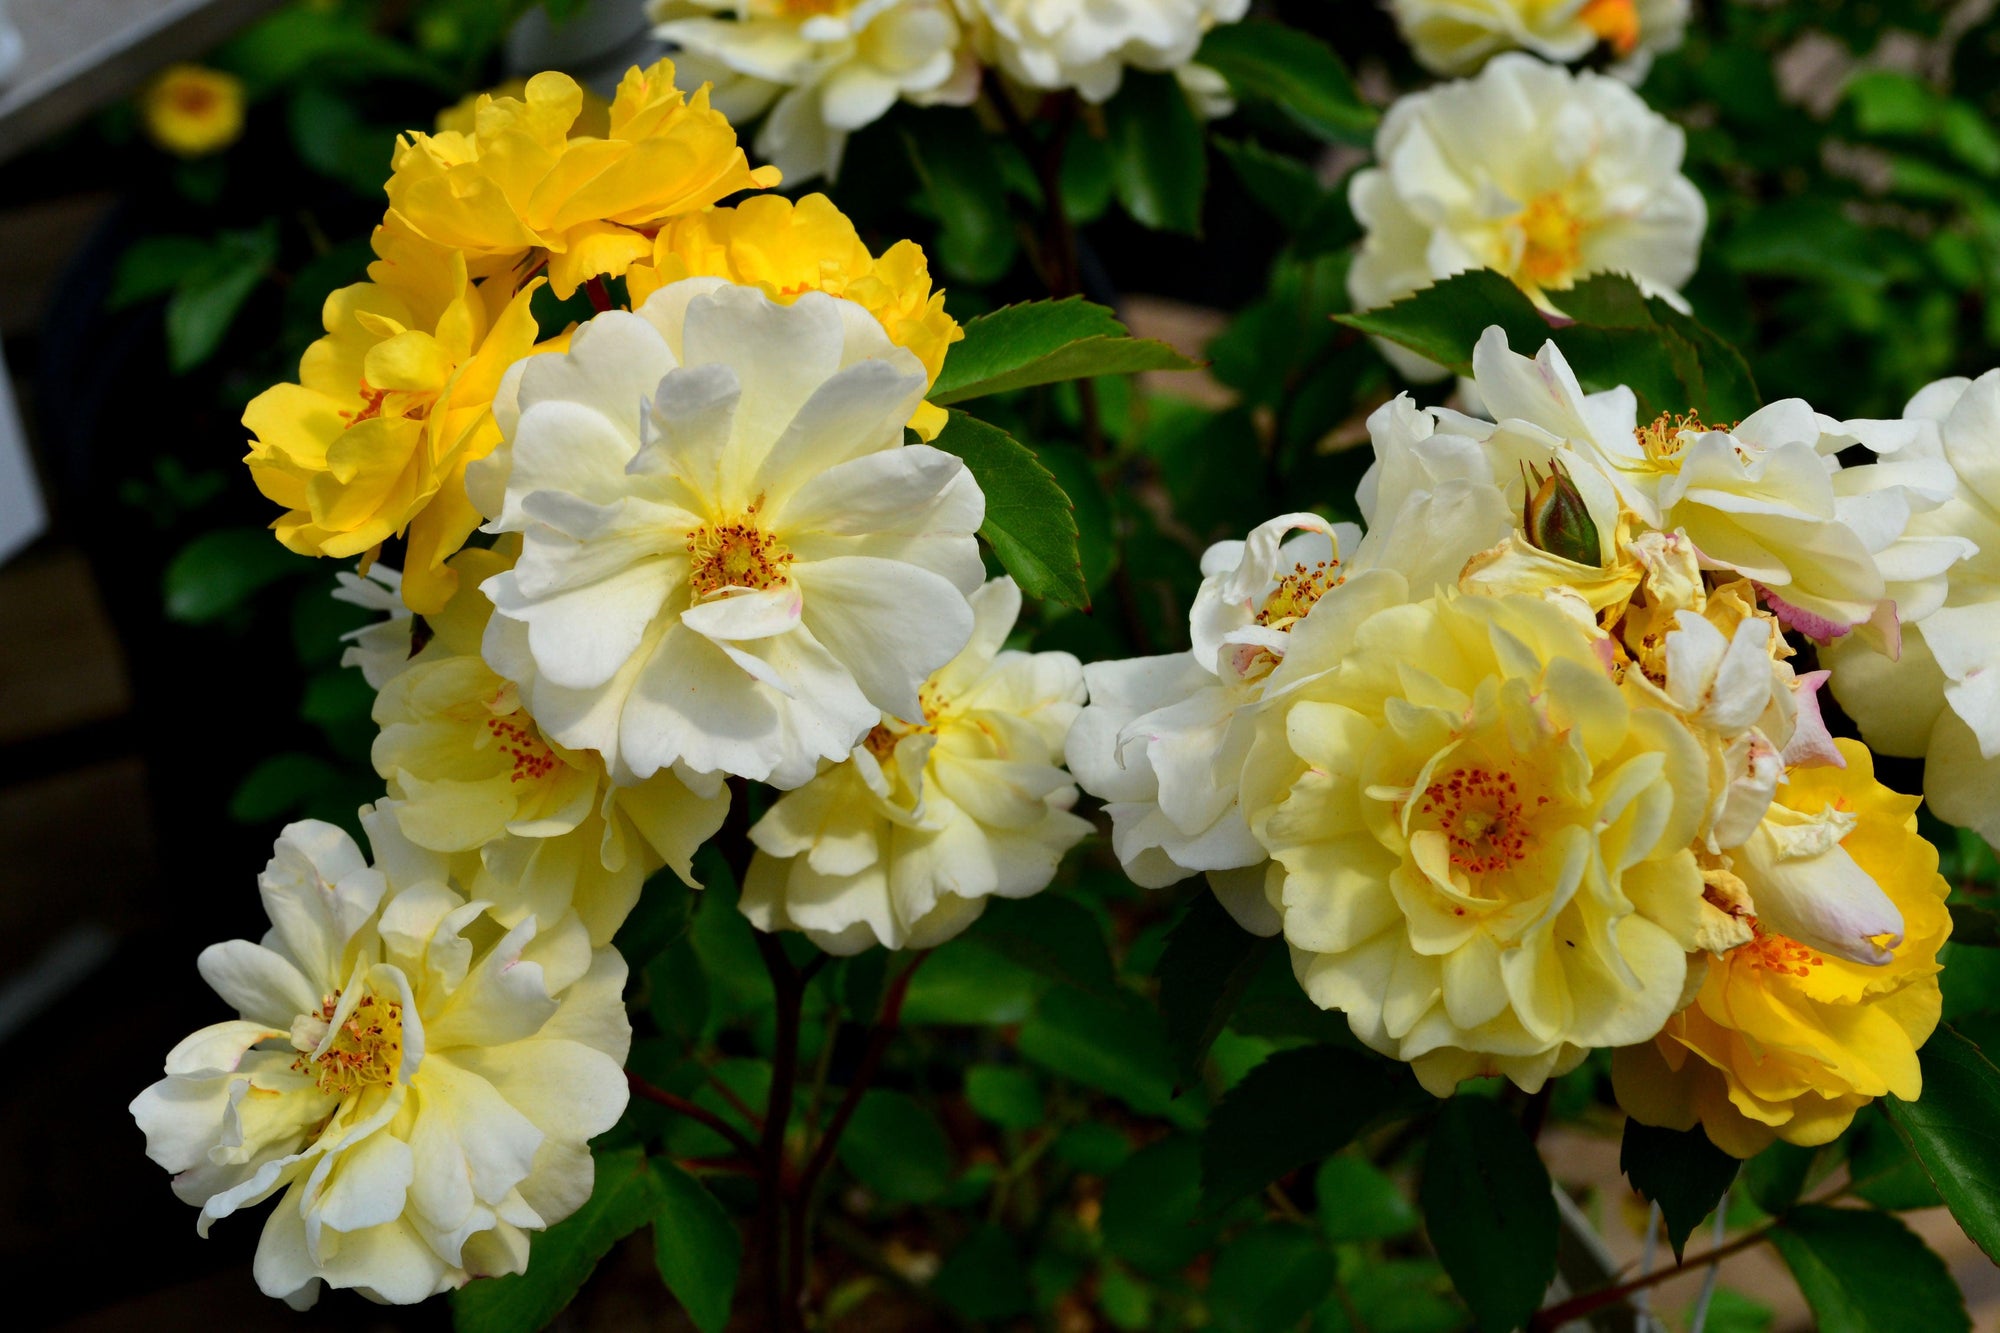 This rose variety showcases a beautiful combination of yellow and white petals, creating a striking visual display. Against the backdrop of deep green foliage, the vibrant colors of the flowers truly stand out and add a touch of elegance to the landscape. 